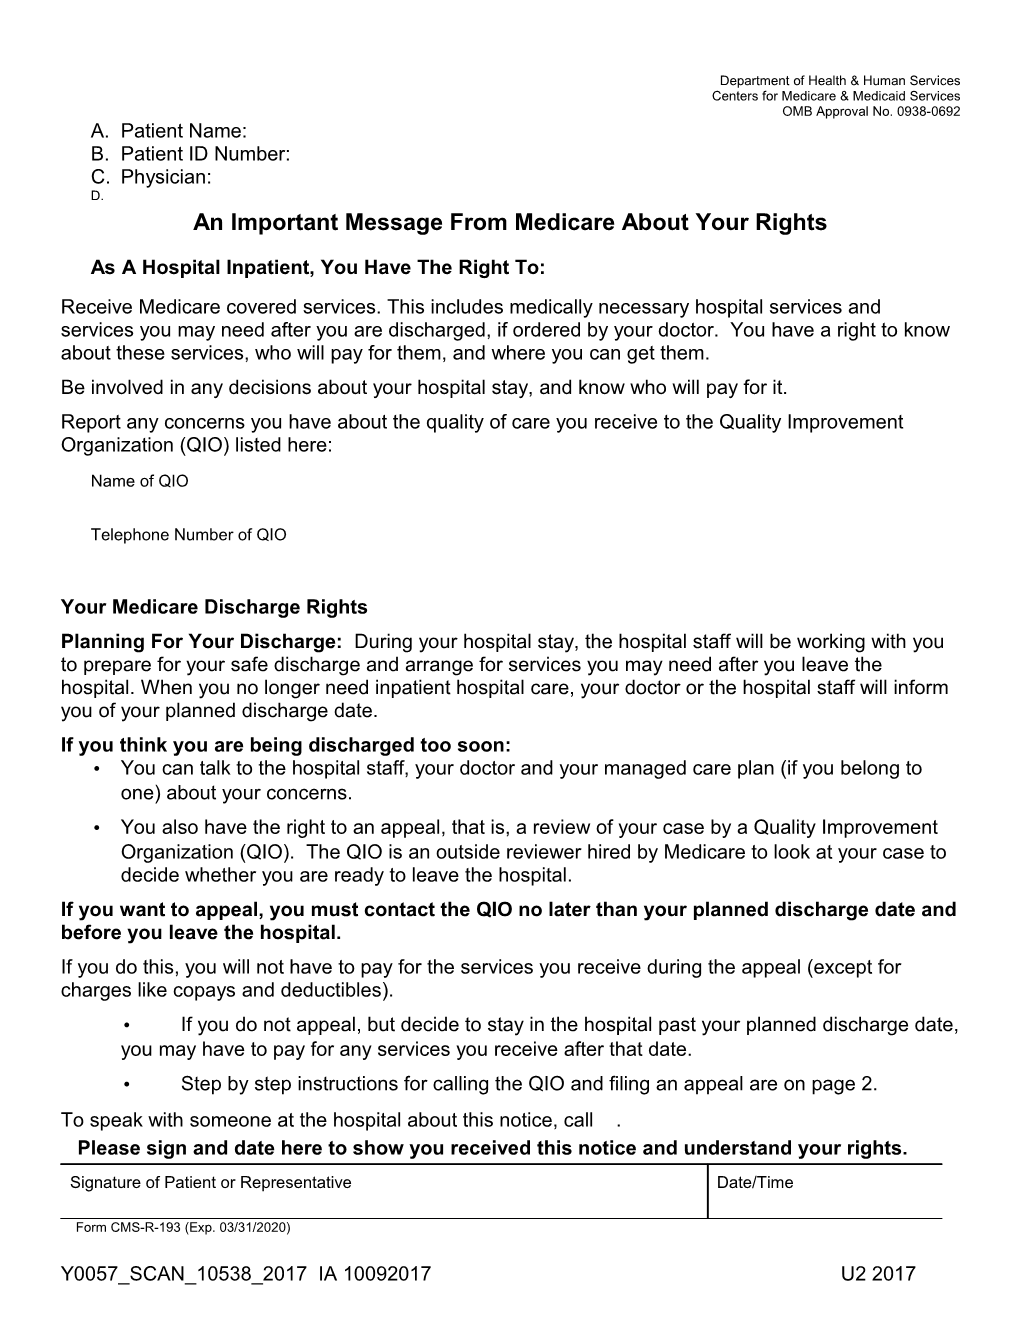 An Important Message from Medicare About Your Rights